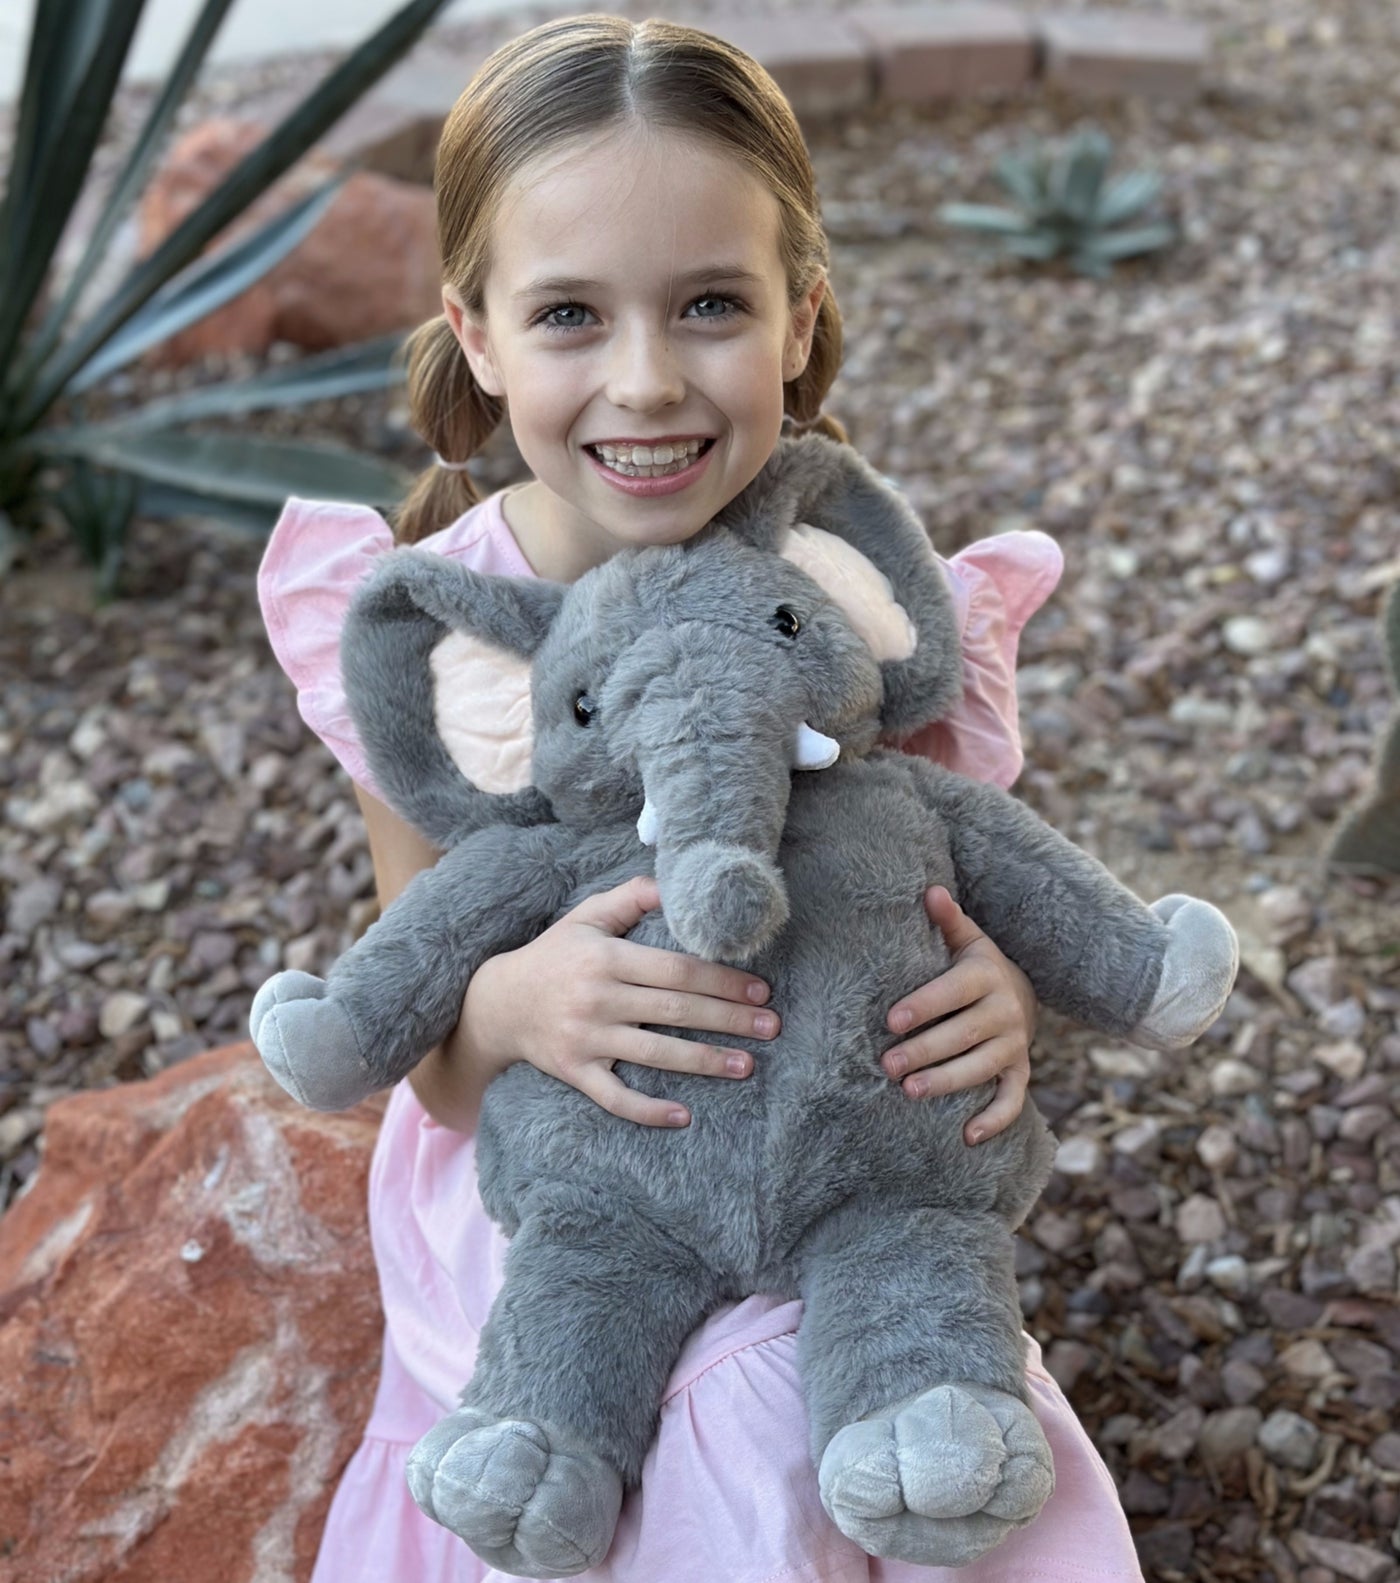 This charmingly realistic grey elephant plush toy is too adorable to resist! It's made with a soft and comfy plush material, filled with PP cotton, perfect for cuddling! Plus, just wait until you unzip this plush toy - you'll find three absolutely darling elephant babies inside—how's that for a surprise? This plush elephant toy makes for an excellent gift, especially for elephant enthusiasts or collectors of stuffed animal toys.